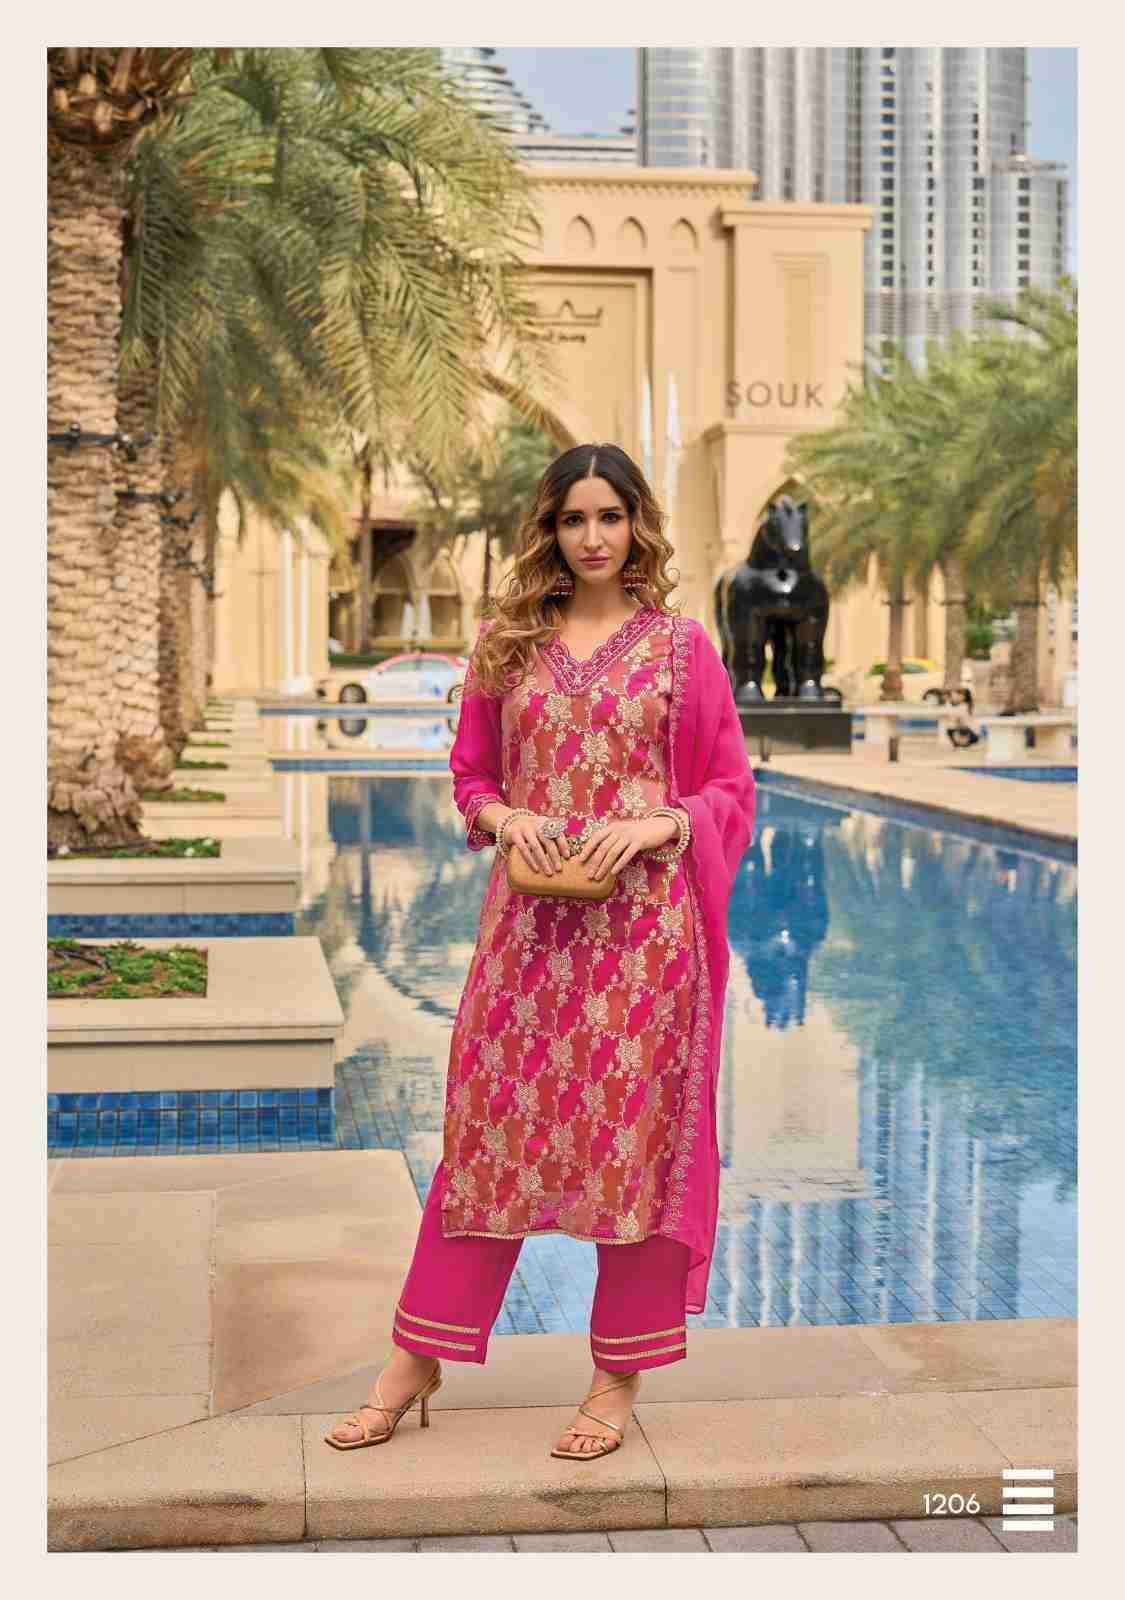 Shimmer By Lady Leela 1201 To 1206 Series Beautiful Festive Suits Colorful Stylish Fancy Casual Wear & Ethnic Wear Pure Viscose Jacquard Dresses At Wholesale Price